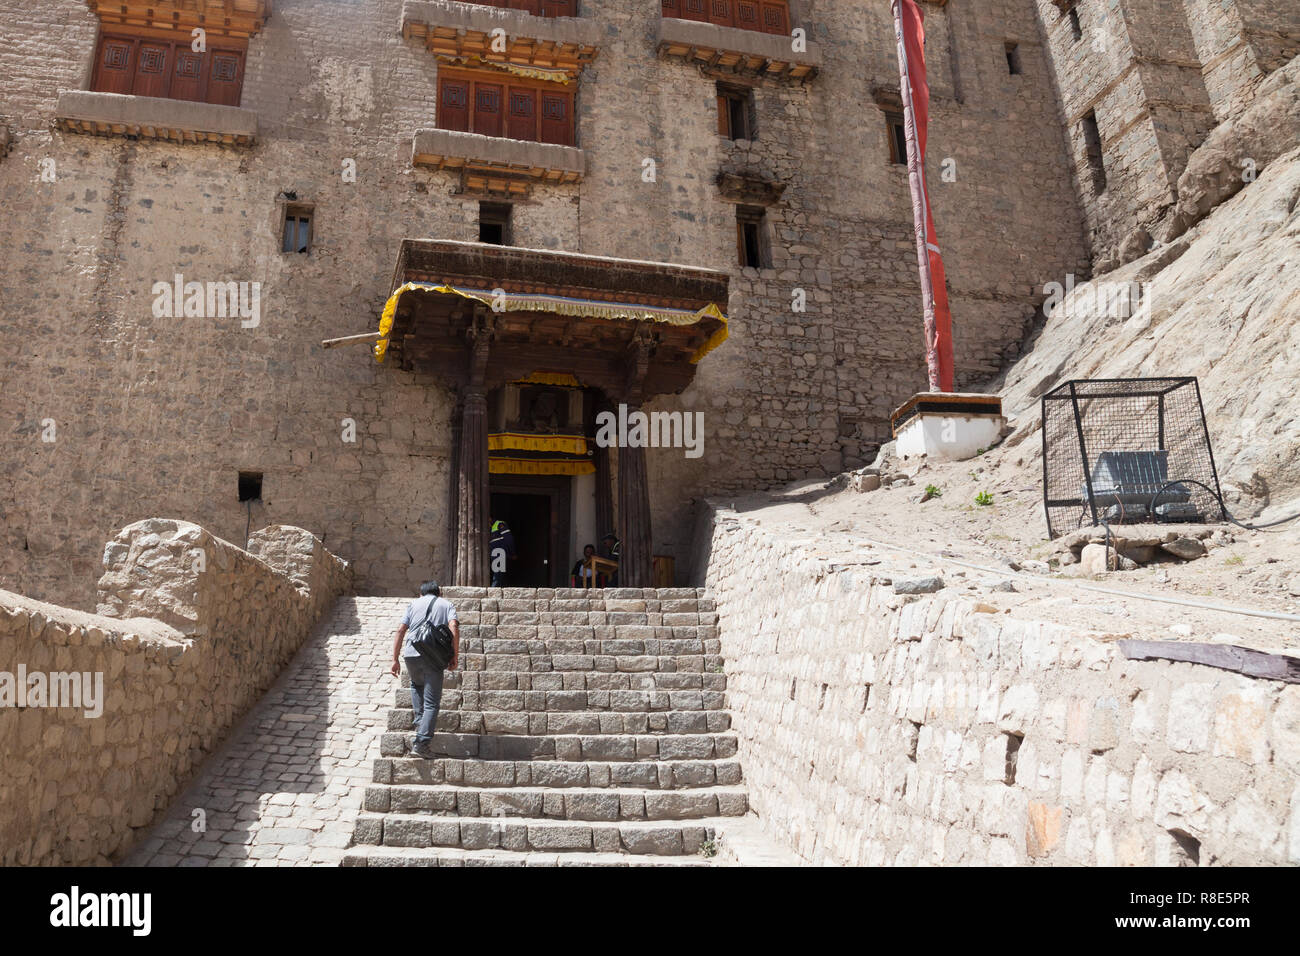 Man with a bag going towards the entrance to Leh Palace, Leh, Ladakh, Jammu and Kashmir, India Stock Photo